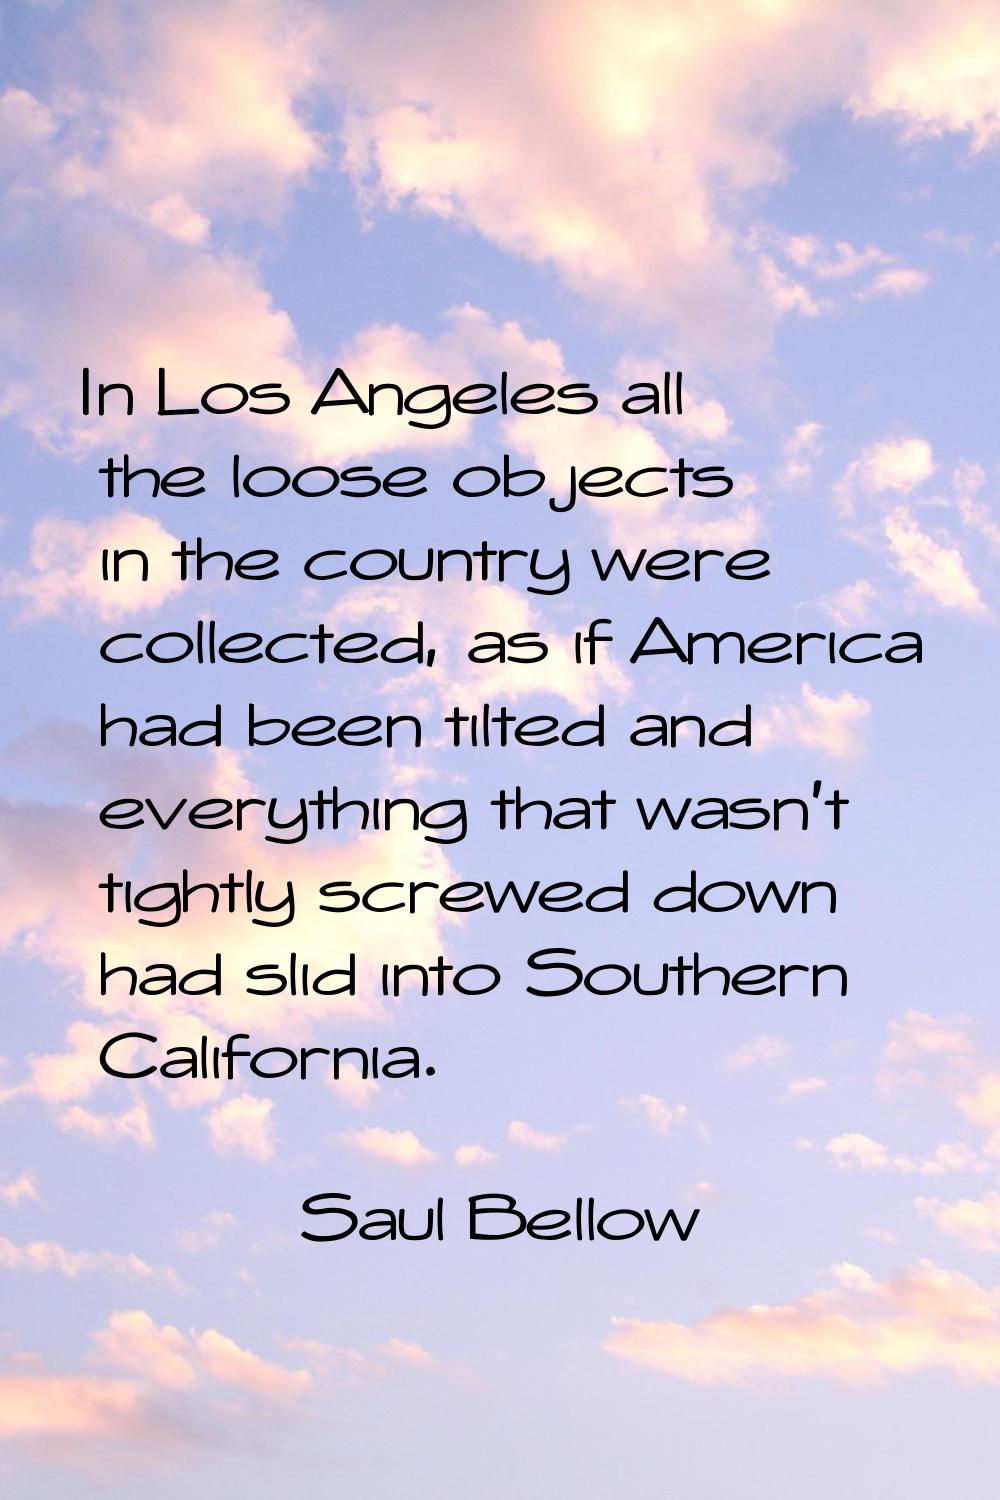 In Los Angeles all the loose objects in the country were collected, as if America had been tilted a